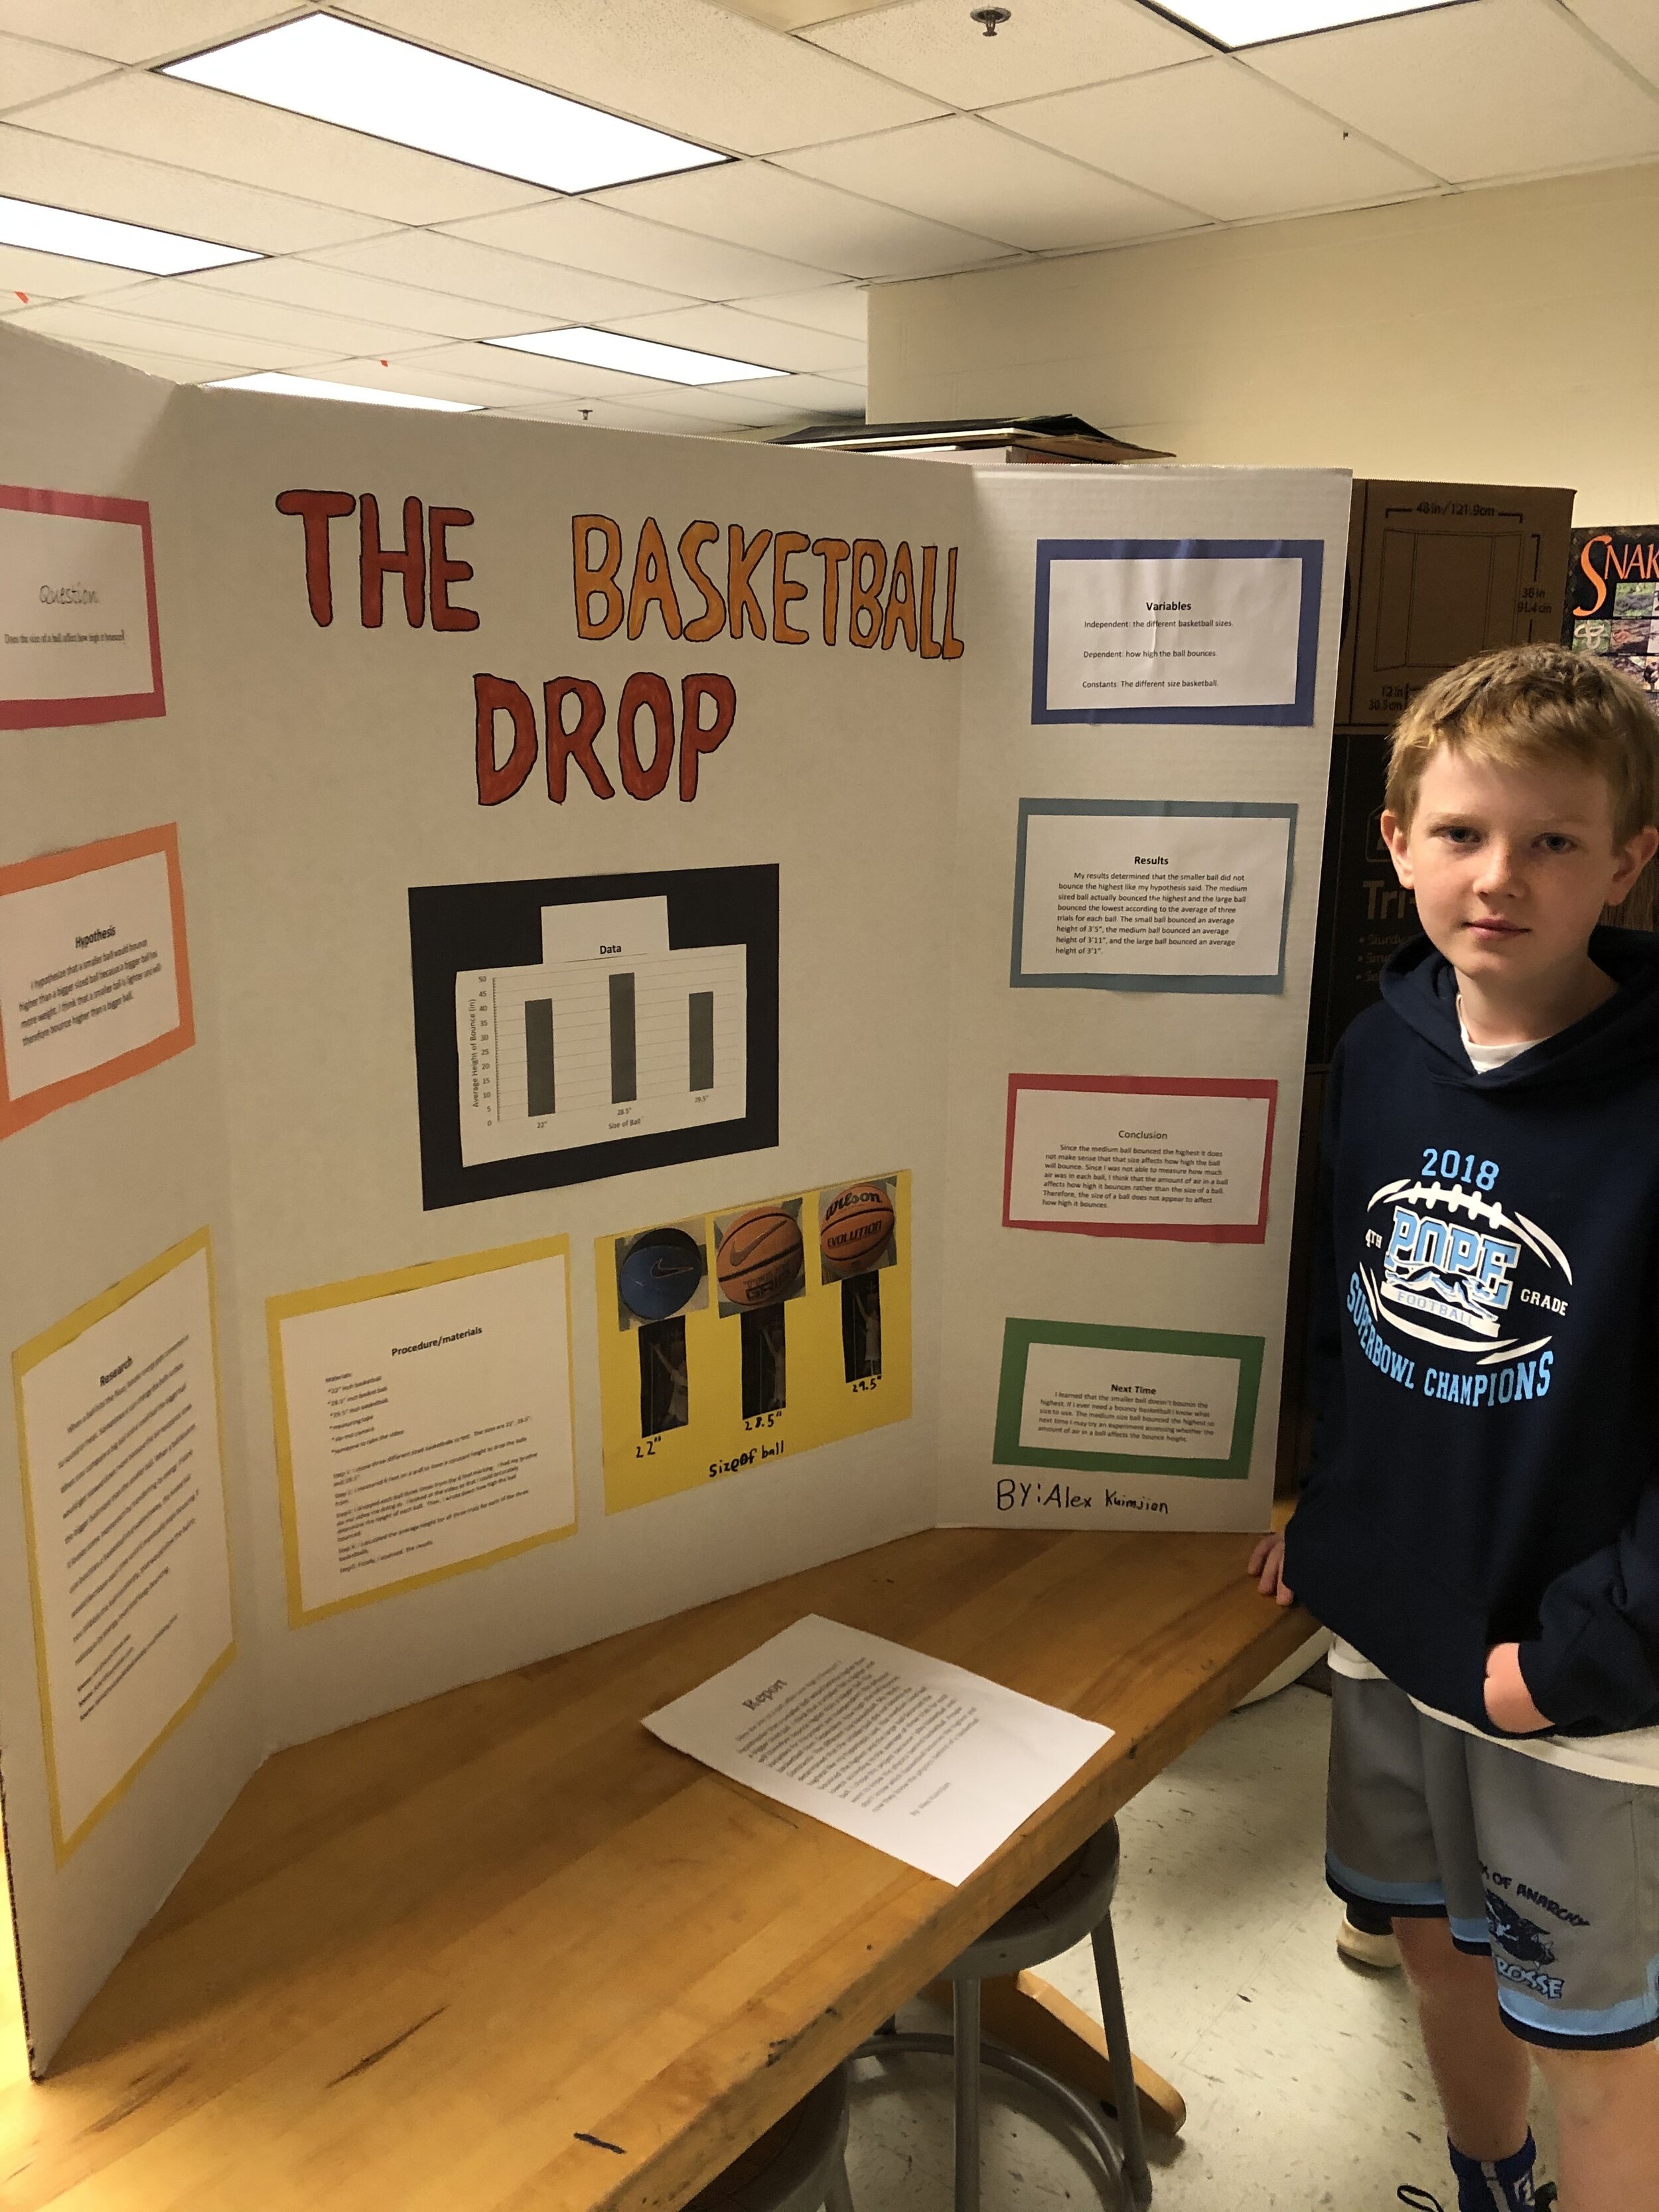 How Does Tee Height Affect Driving Distance?  Science fair projects, Science  fair, Science fair board